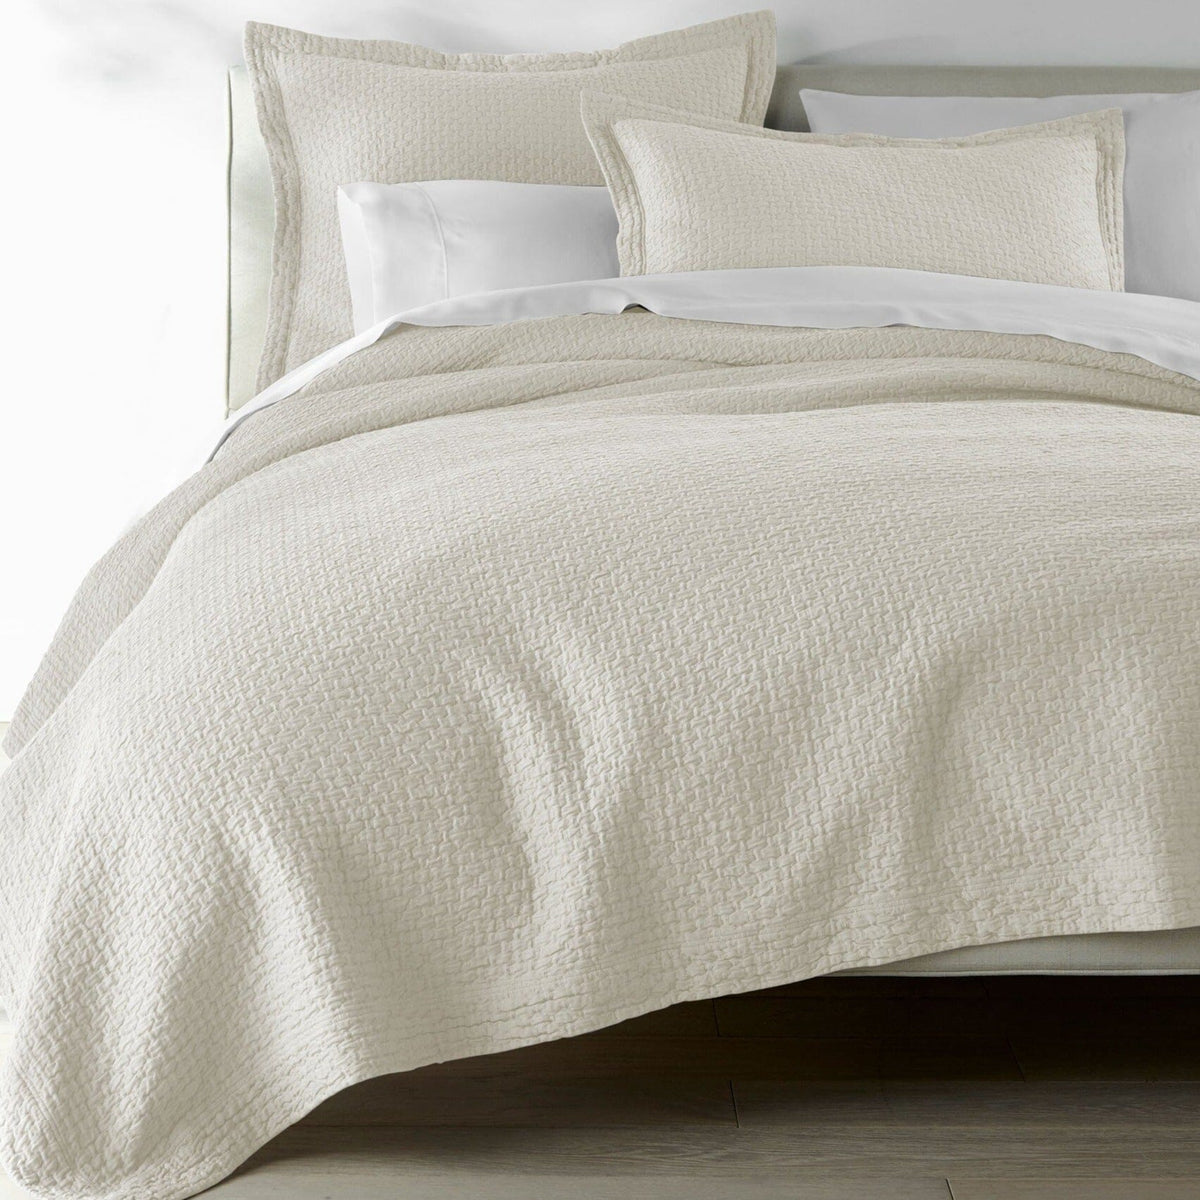 Juliet Pearl Coverlets | Peacock Alley Matelasse Shown on Bed with Shams